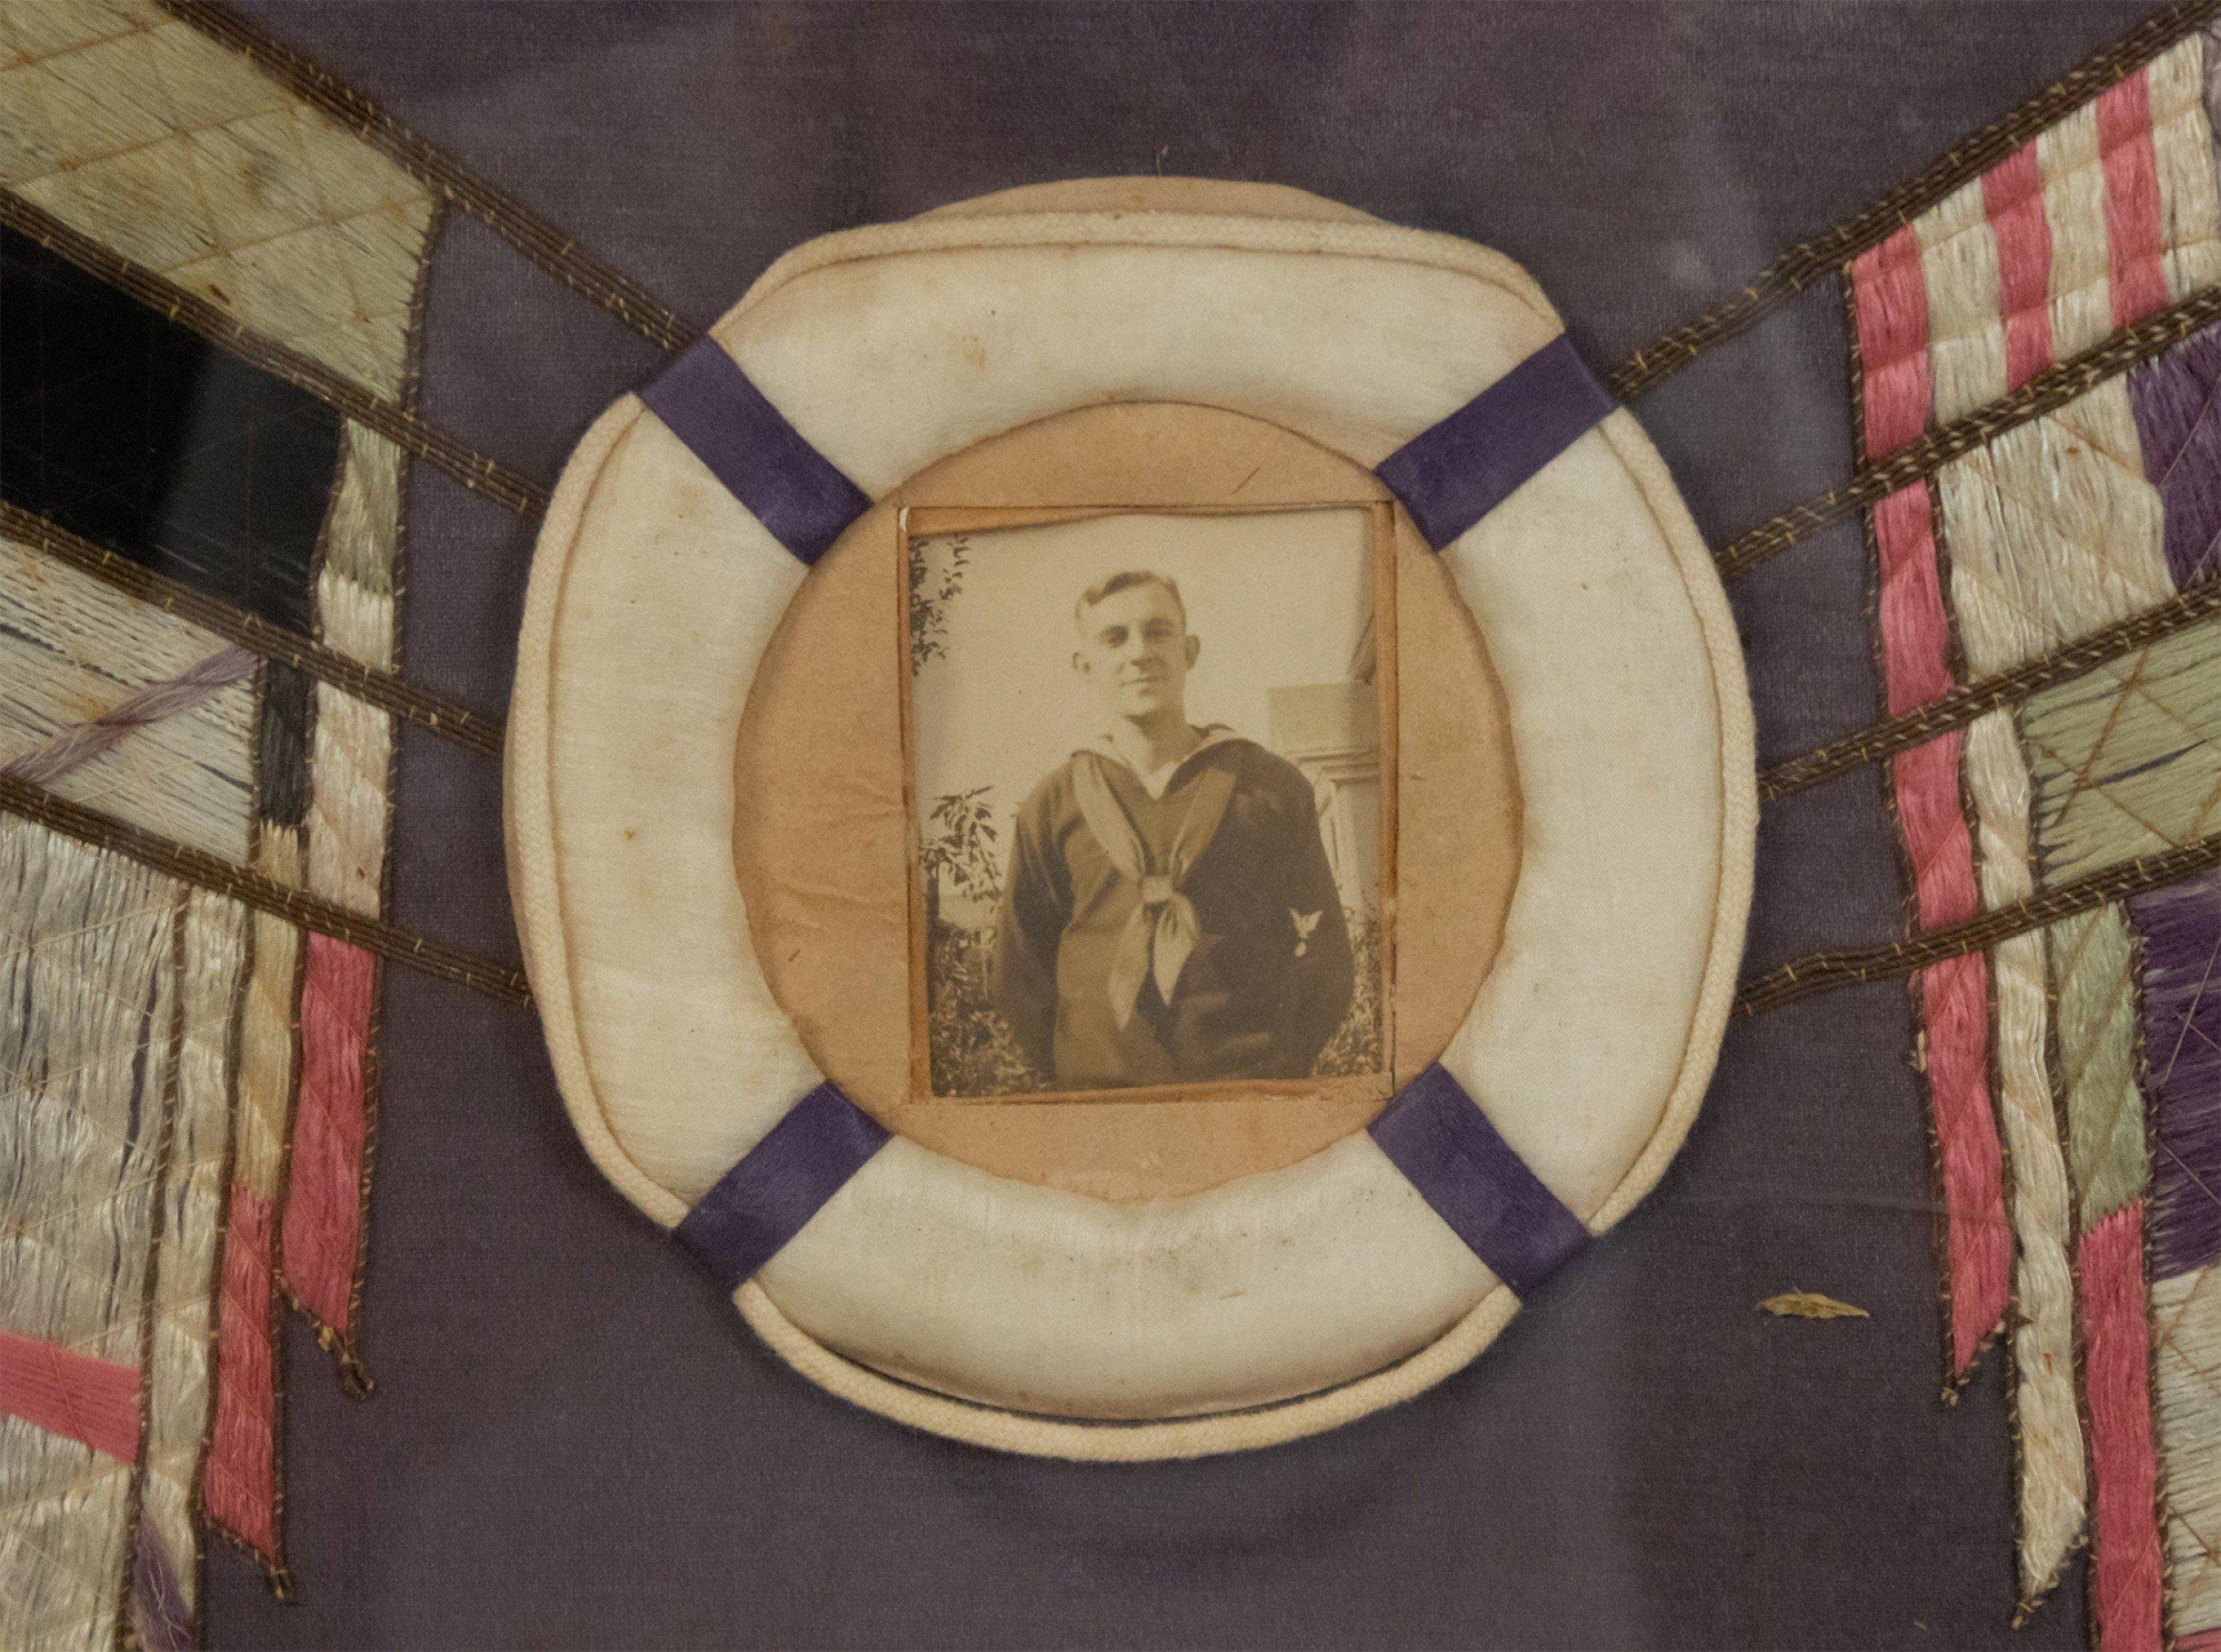 English (20th century) ebonized framed memorial embroidery of flags and ships with photograph of a sailor in a life raft. Text embroidered at top, 